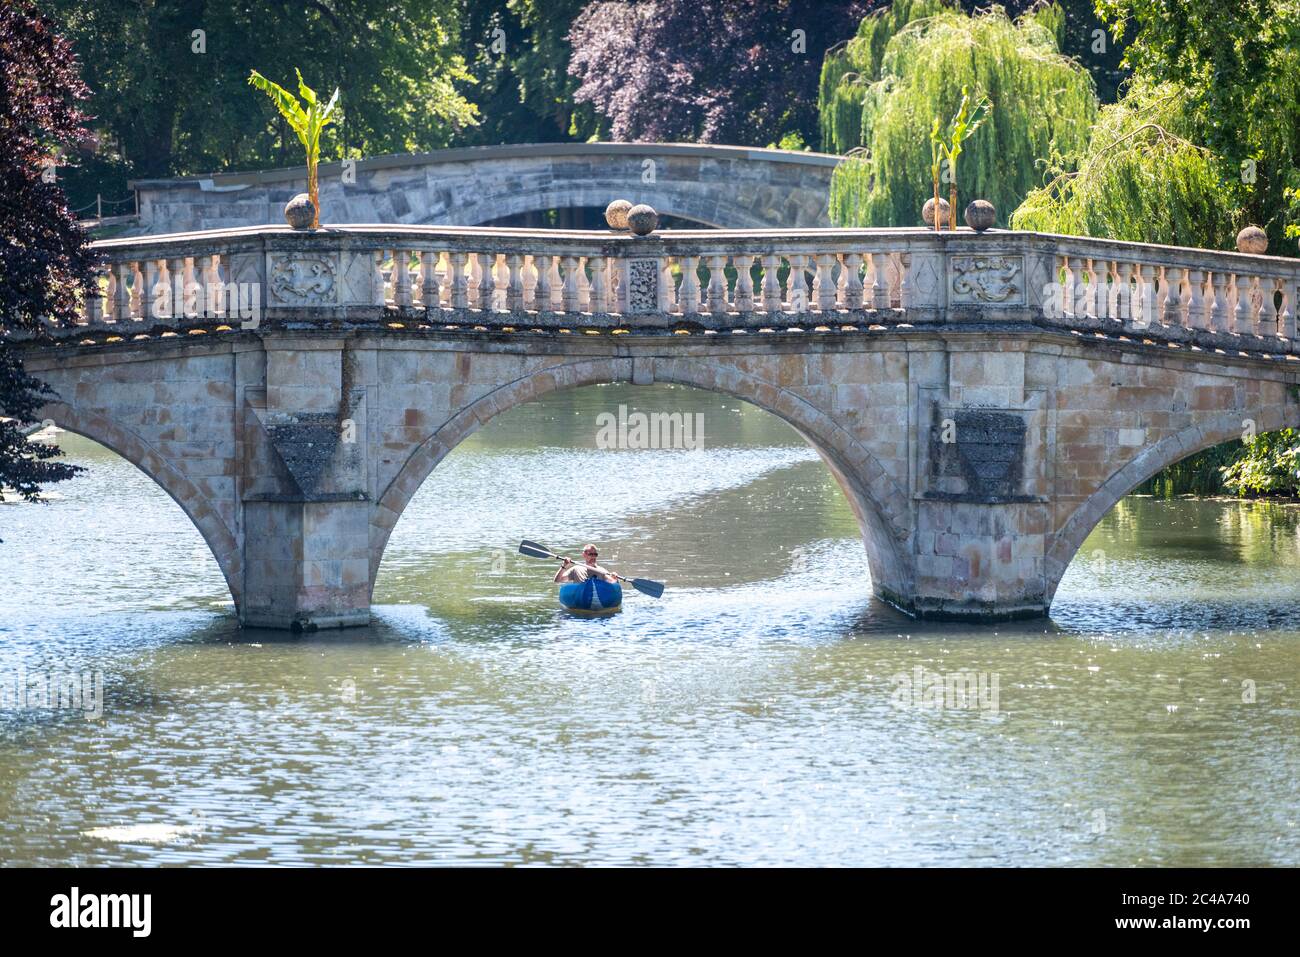 Cambridge, UK. 25th June, 2020. A man enjoys the heatwave in a kayak on the River Cam by Clare Bridge as temperatures rise above 30 degrees centigrade. The river is very quiet due to the shutting of most punting companies during the coronavirus lockdown. There are also warnings of high ultraviolet violet rays in the less polluted summer weather. Credit: Julian Eales/Alamy Live News Stock Photo